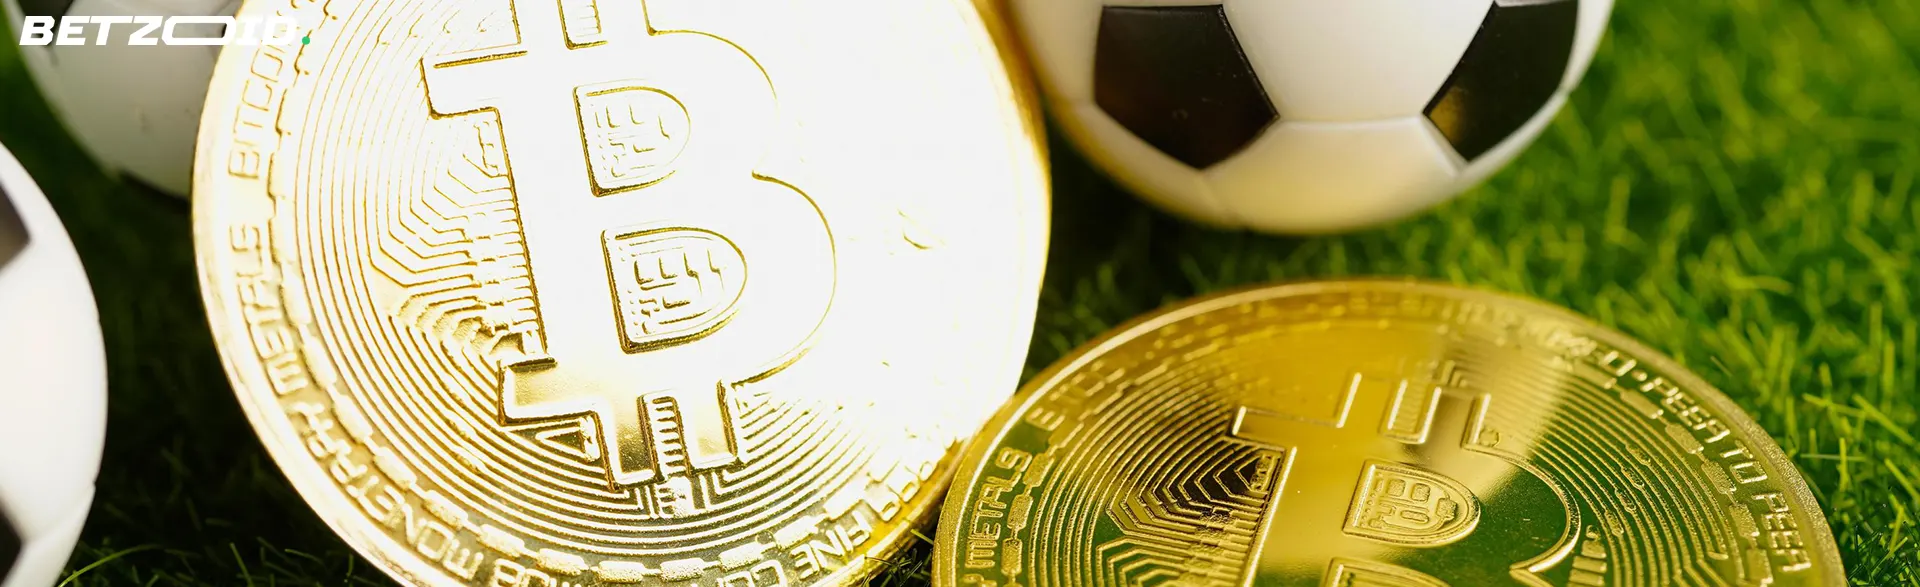 Close-up of golden Bitcoin coins on a grassy field, with a soccer ball in the background, illustrating the integration of cryptocurrency in sportsbooks for Canadian bettors.